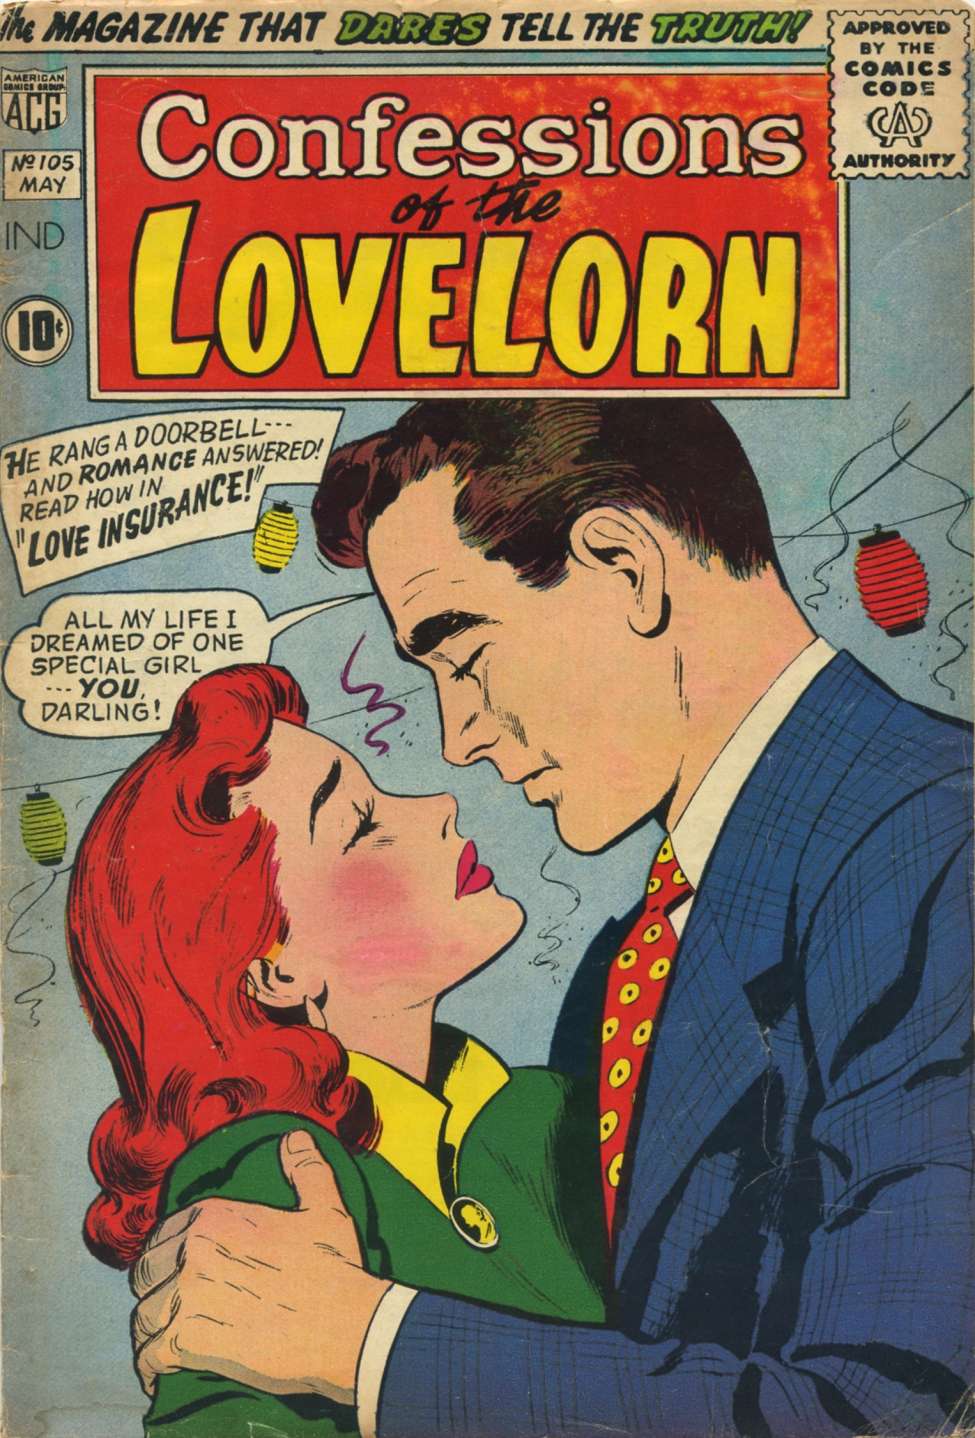 Comic Book Cover For Confessions of the Lovelorn 105